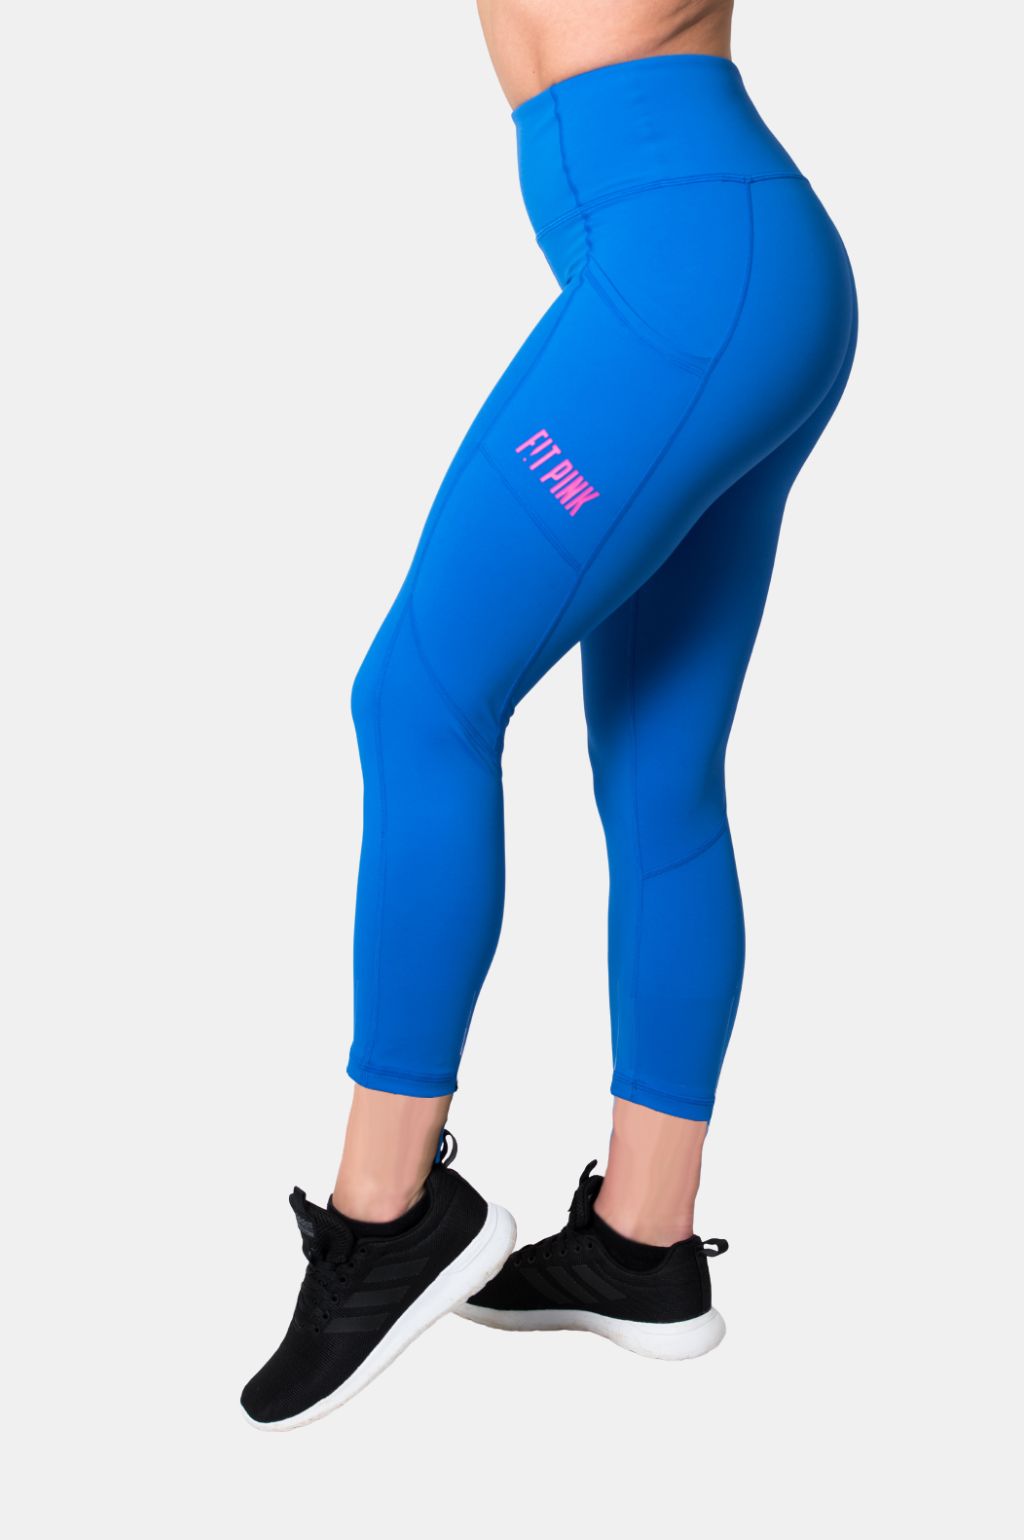 Marble tights| Workout tights| Best workout leggings – Brick Built